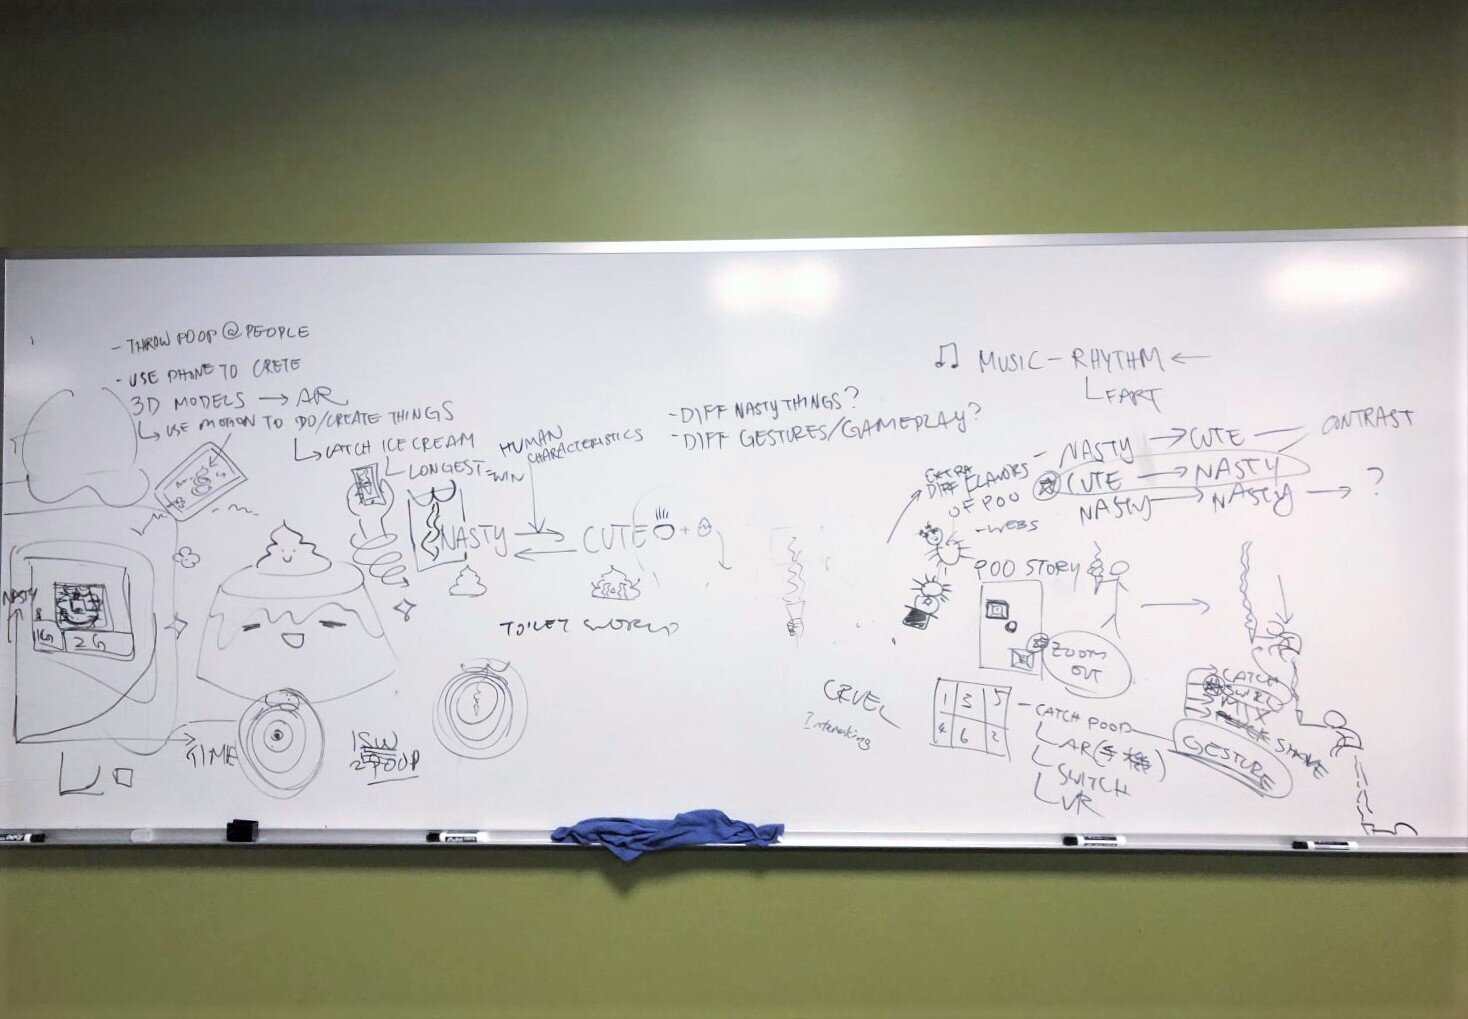  Our whiteboard of ideas and thoughts for the project during our first brainstorm session. 